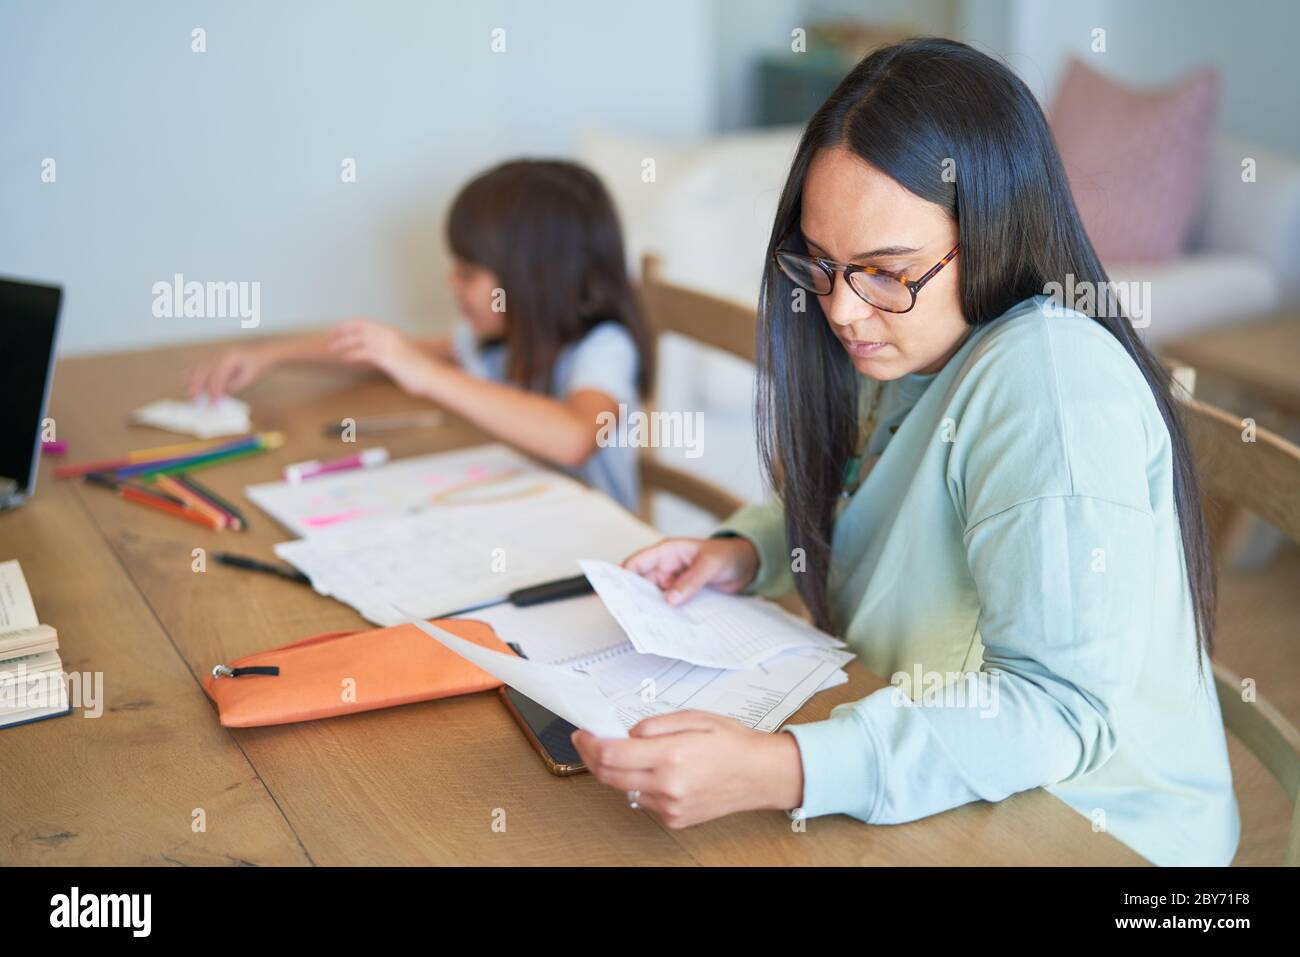 Woman paying bills next to daughter coloring at table Stock Photo